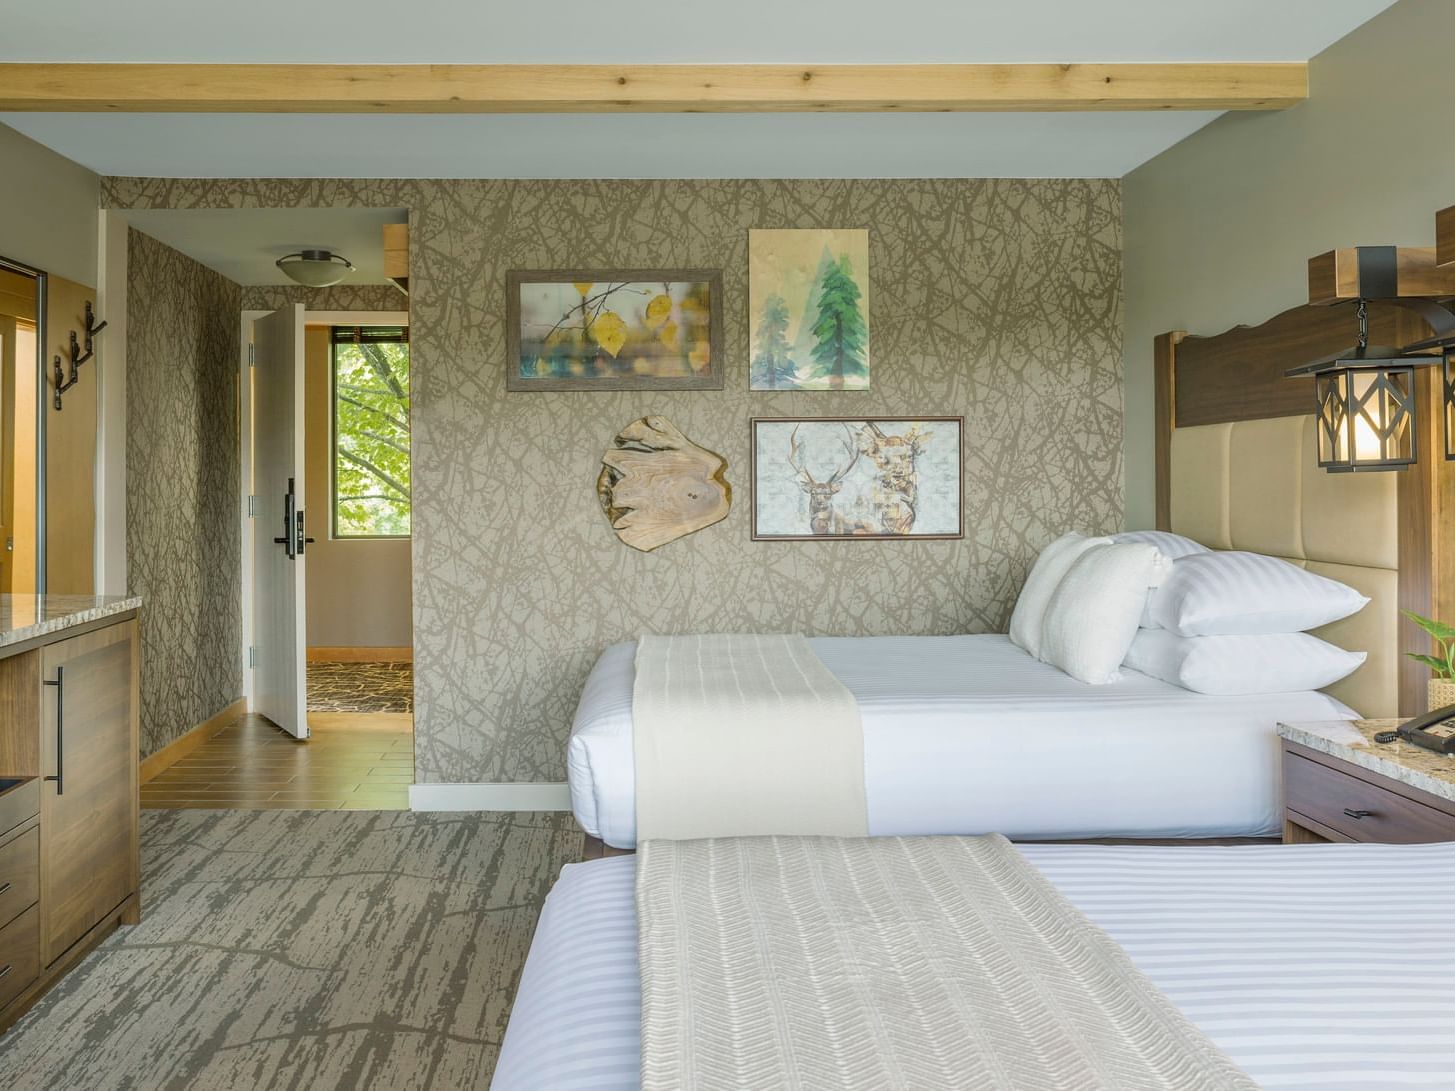 View Double Queen Room with 2 twin beds at High Peaks Resort